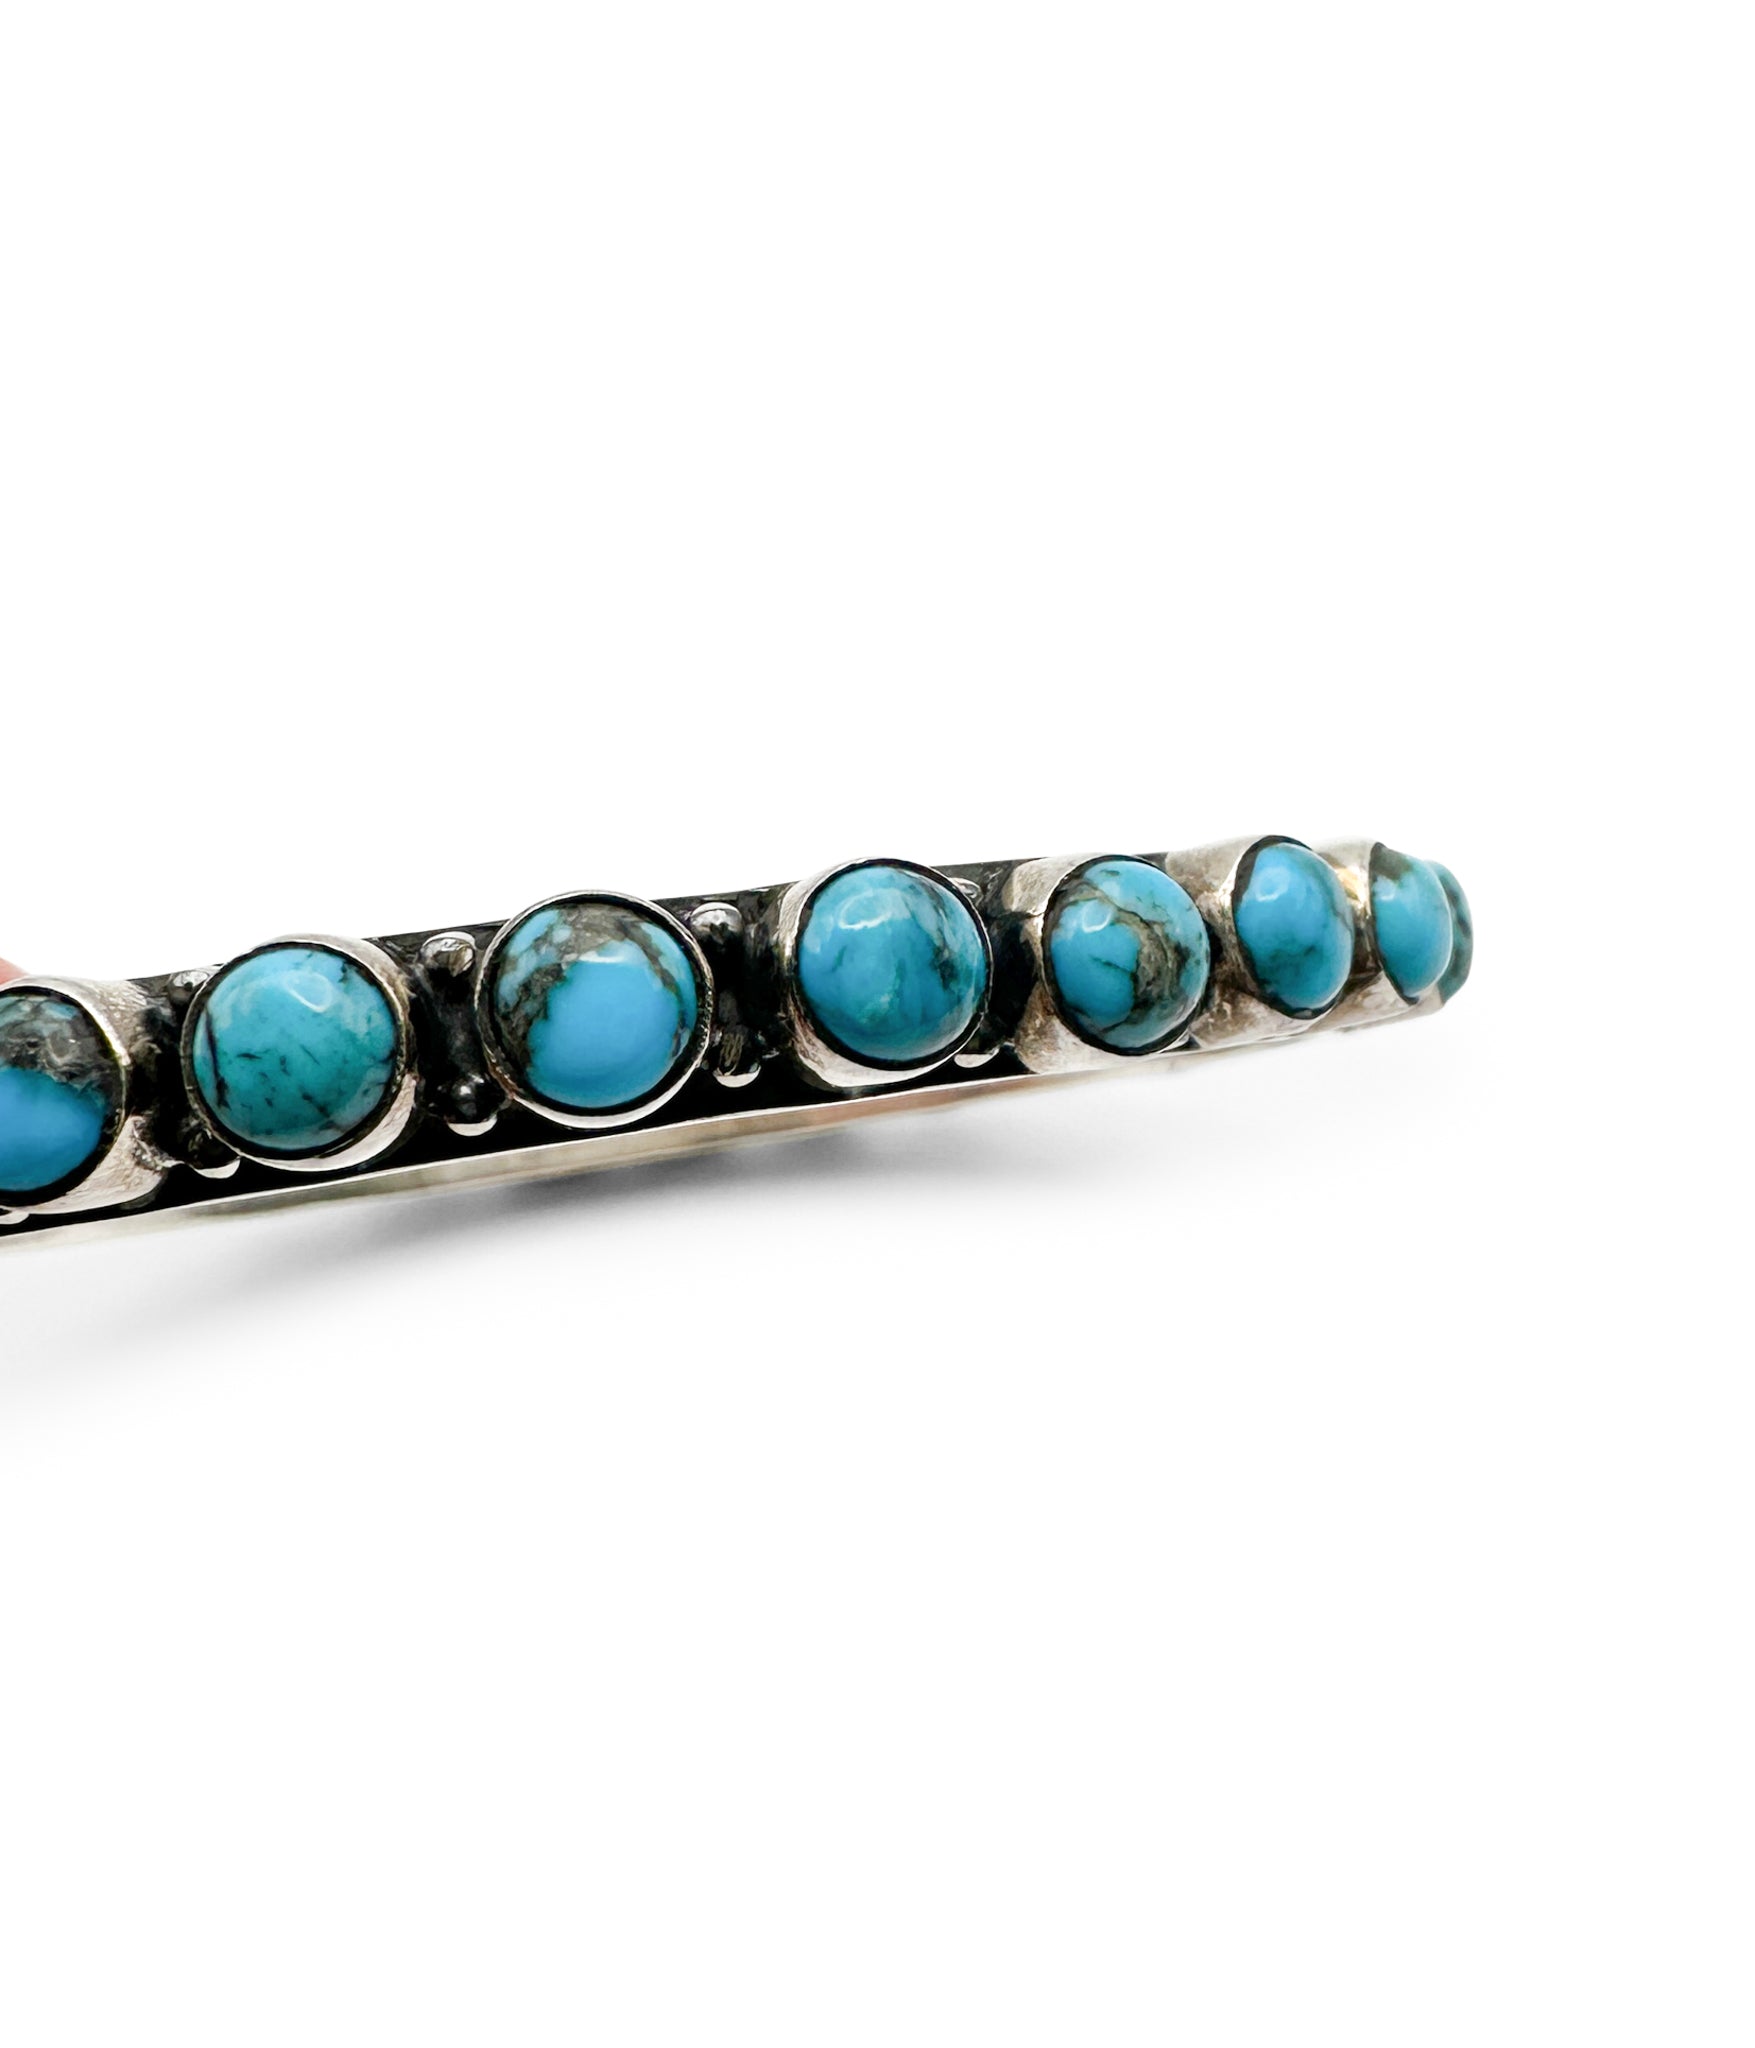 Las Cruces Authentic Turquoise Bangle Bracelet by Navajo Silversmith